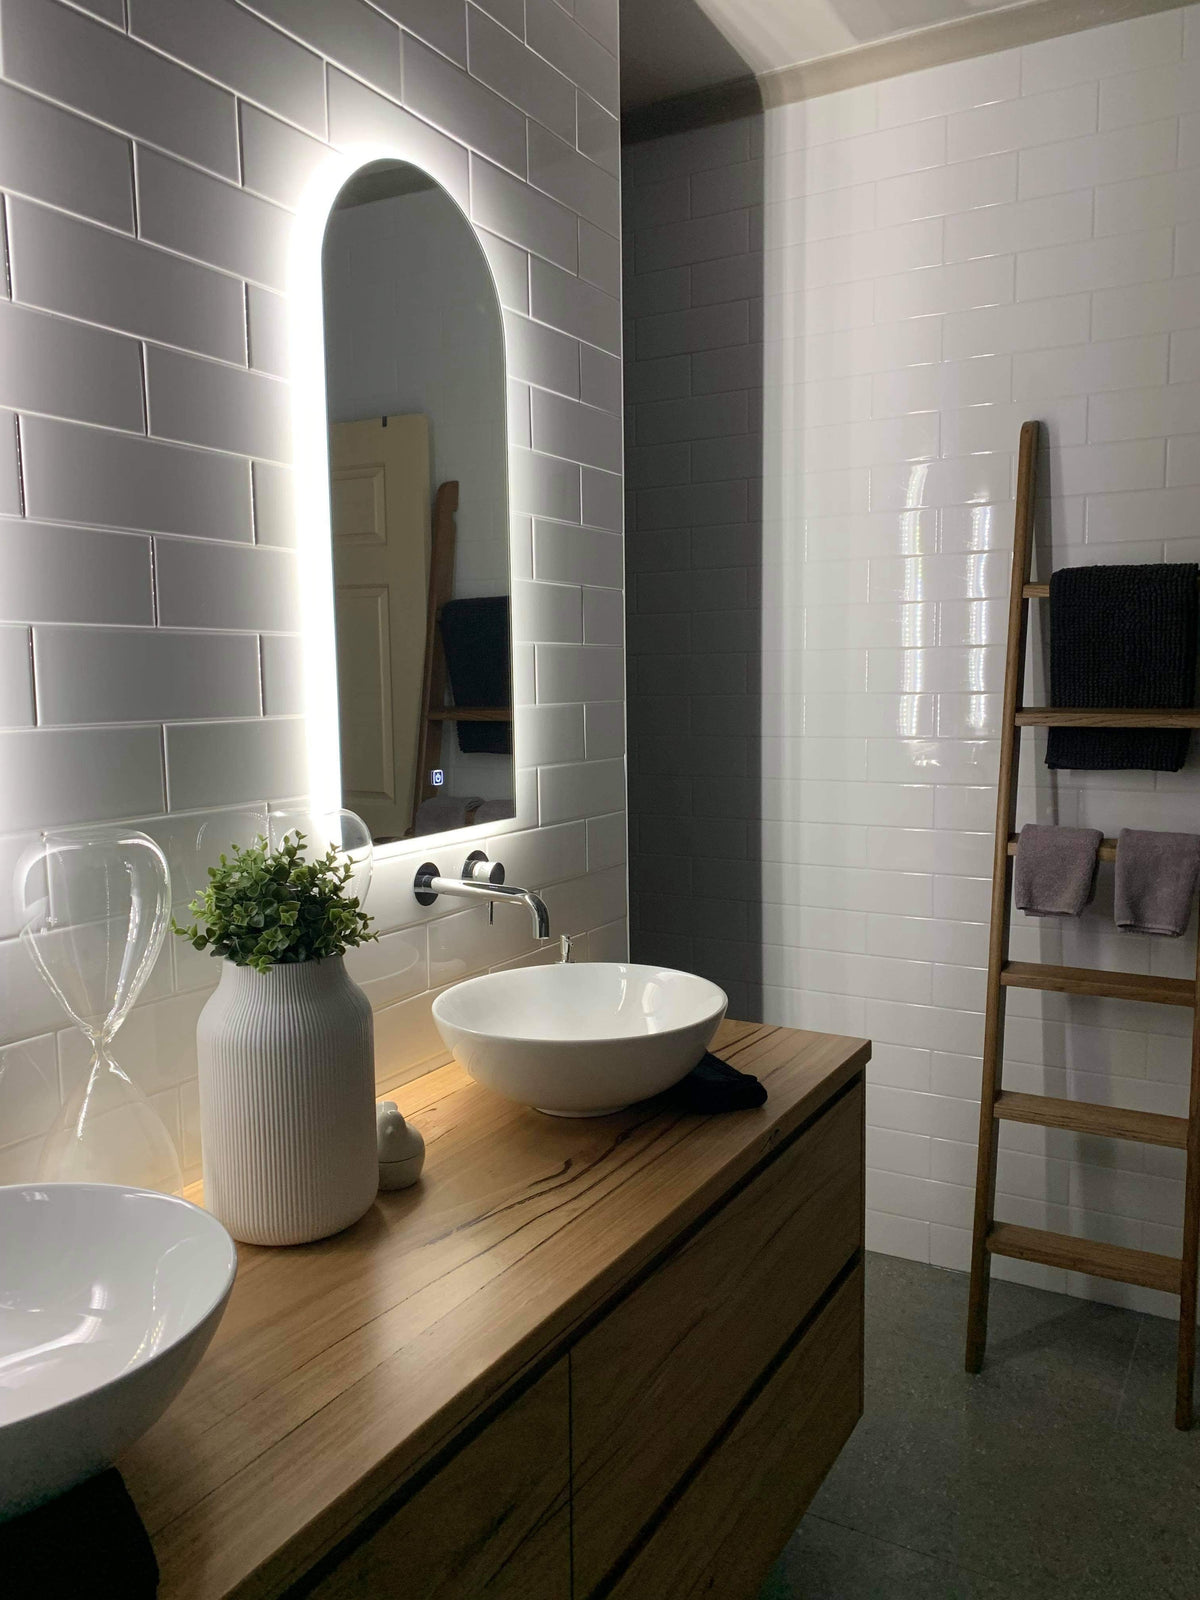 Right LED Foyer Mirror in Couple's Bathroom, Mounted on White Subway Tiles